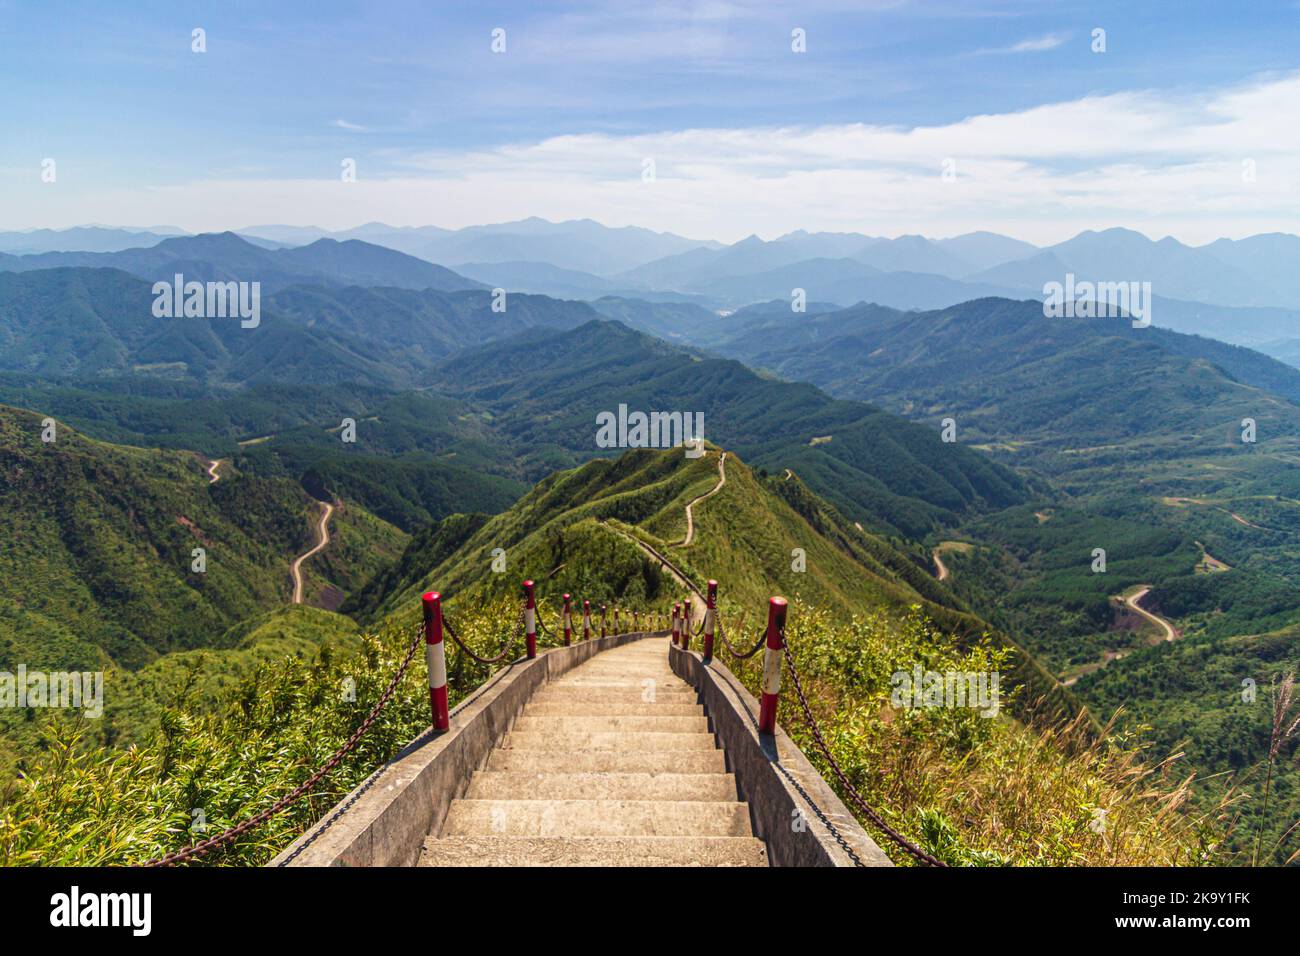 Panoramic image of Binh Lieu mountains area in Quang Ninh province in northeastern Vietnam. This is the border region of Vietnam - China. High-quality photo Stock Photo